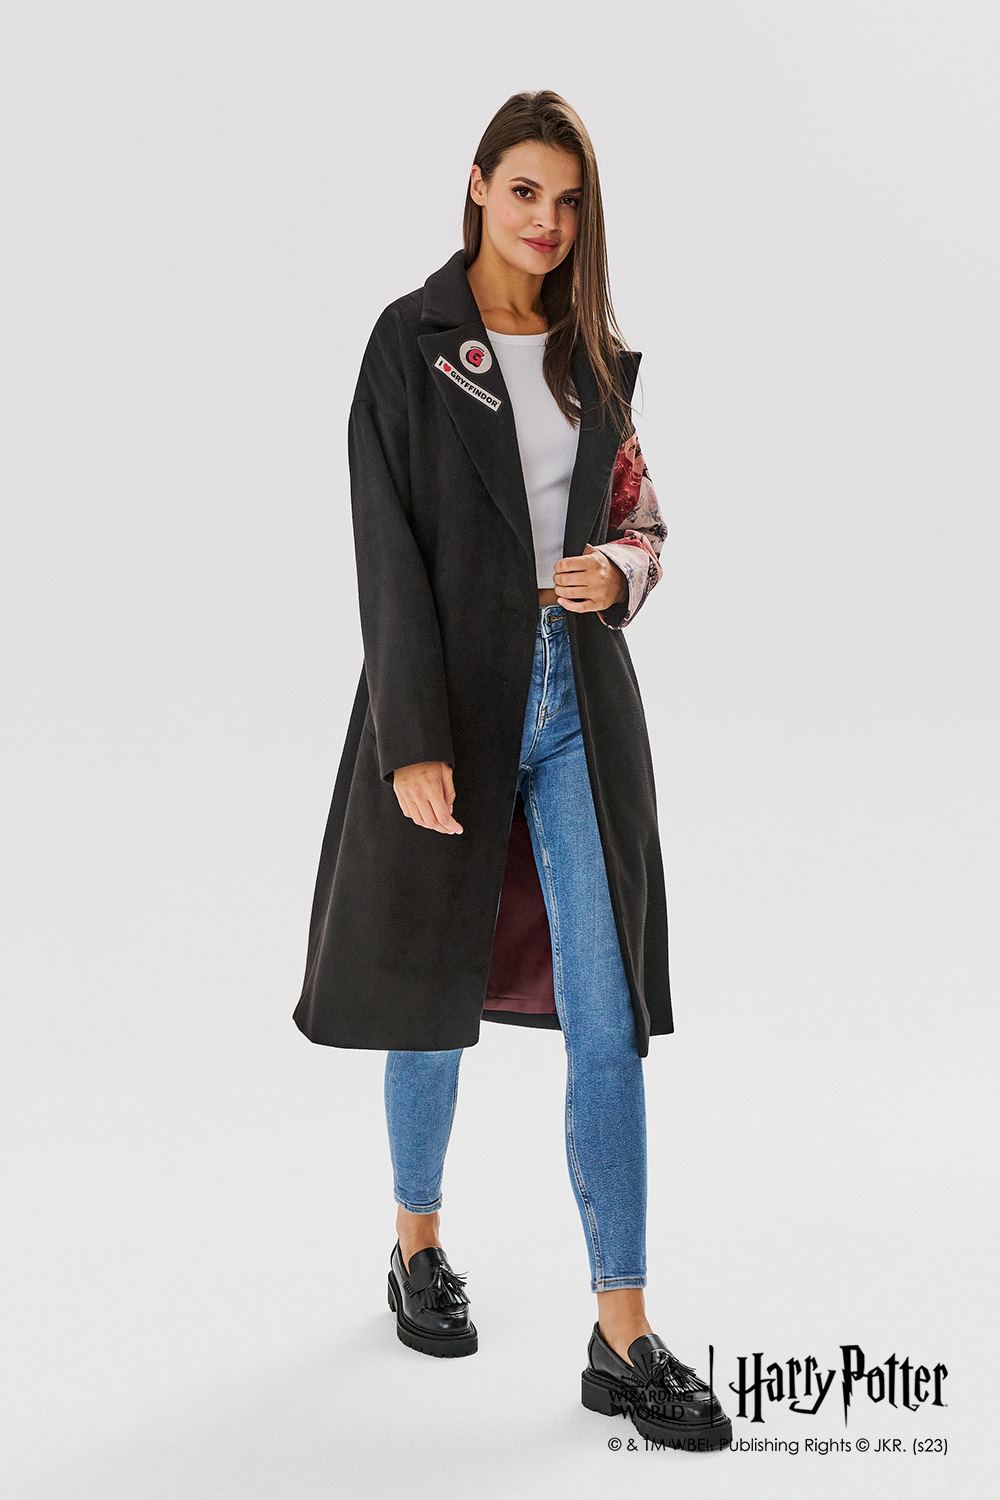 Gryffindor's Army Classic Coat